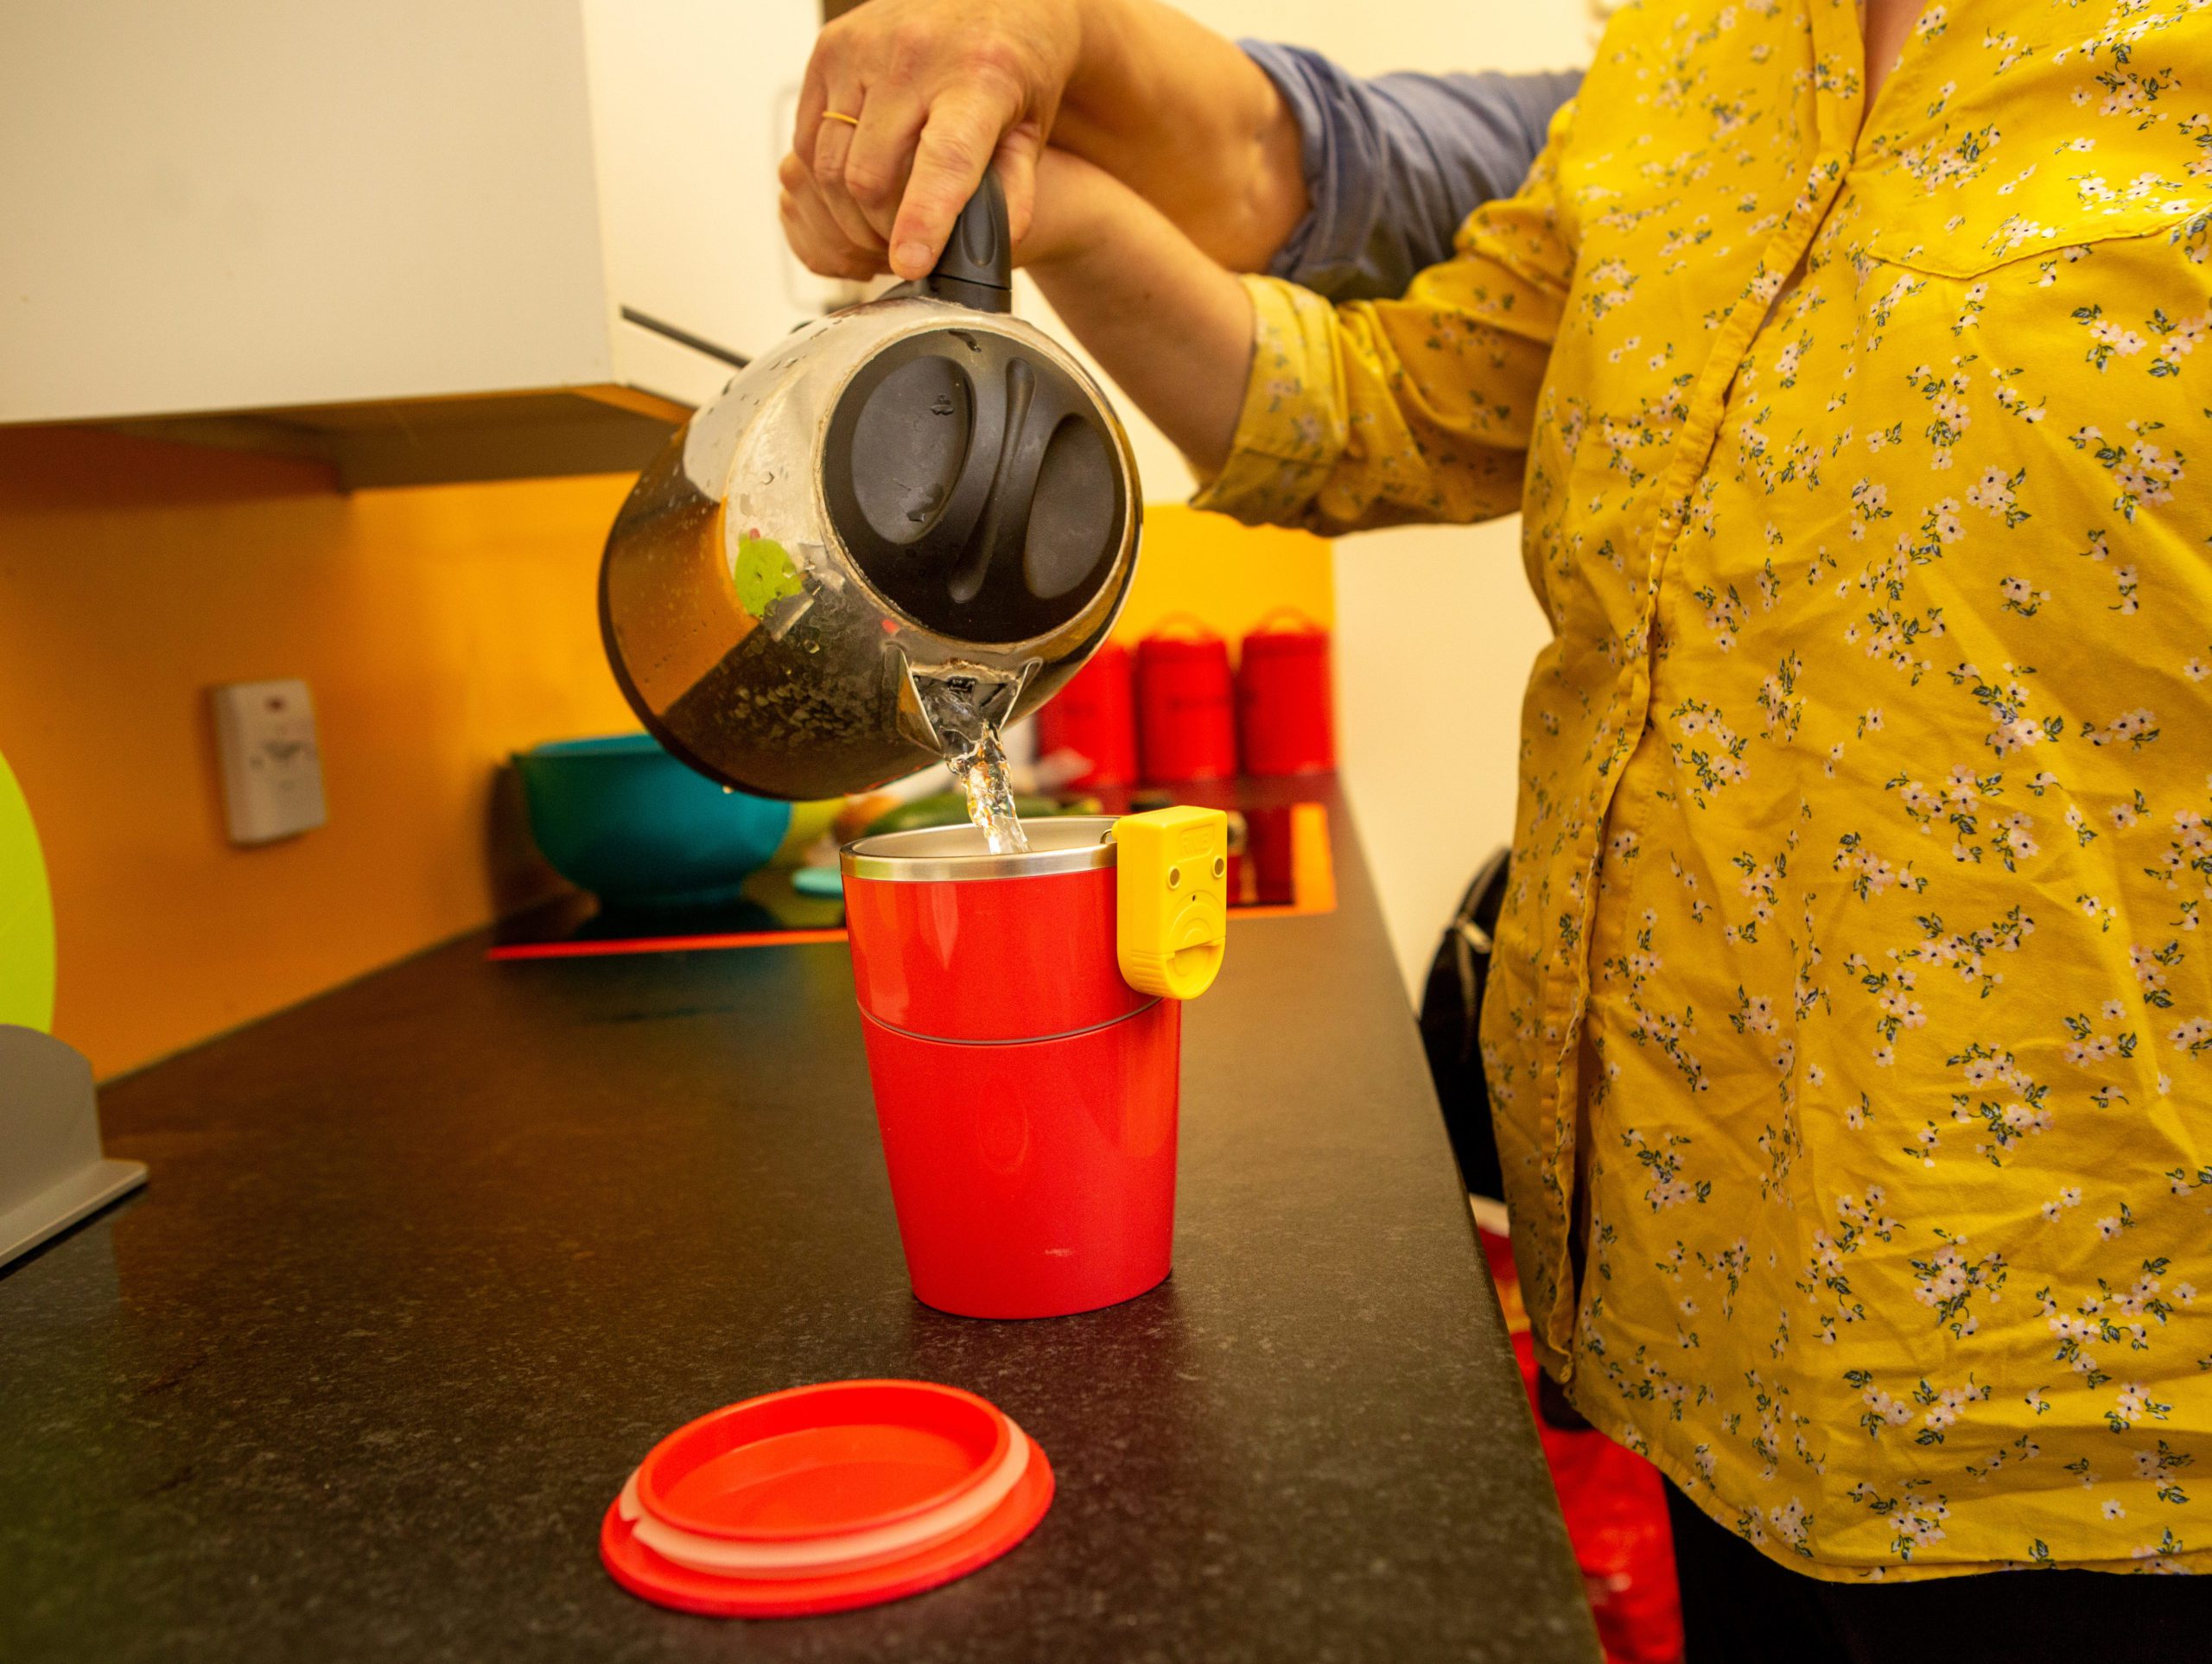 The image shows a persons hands with a kettle of boiling water, they are learning to make a cup of tea using a suction cup and a liquid level indicator.